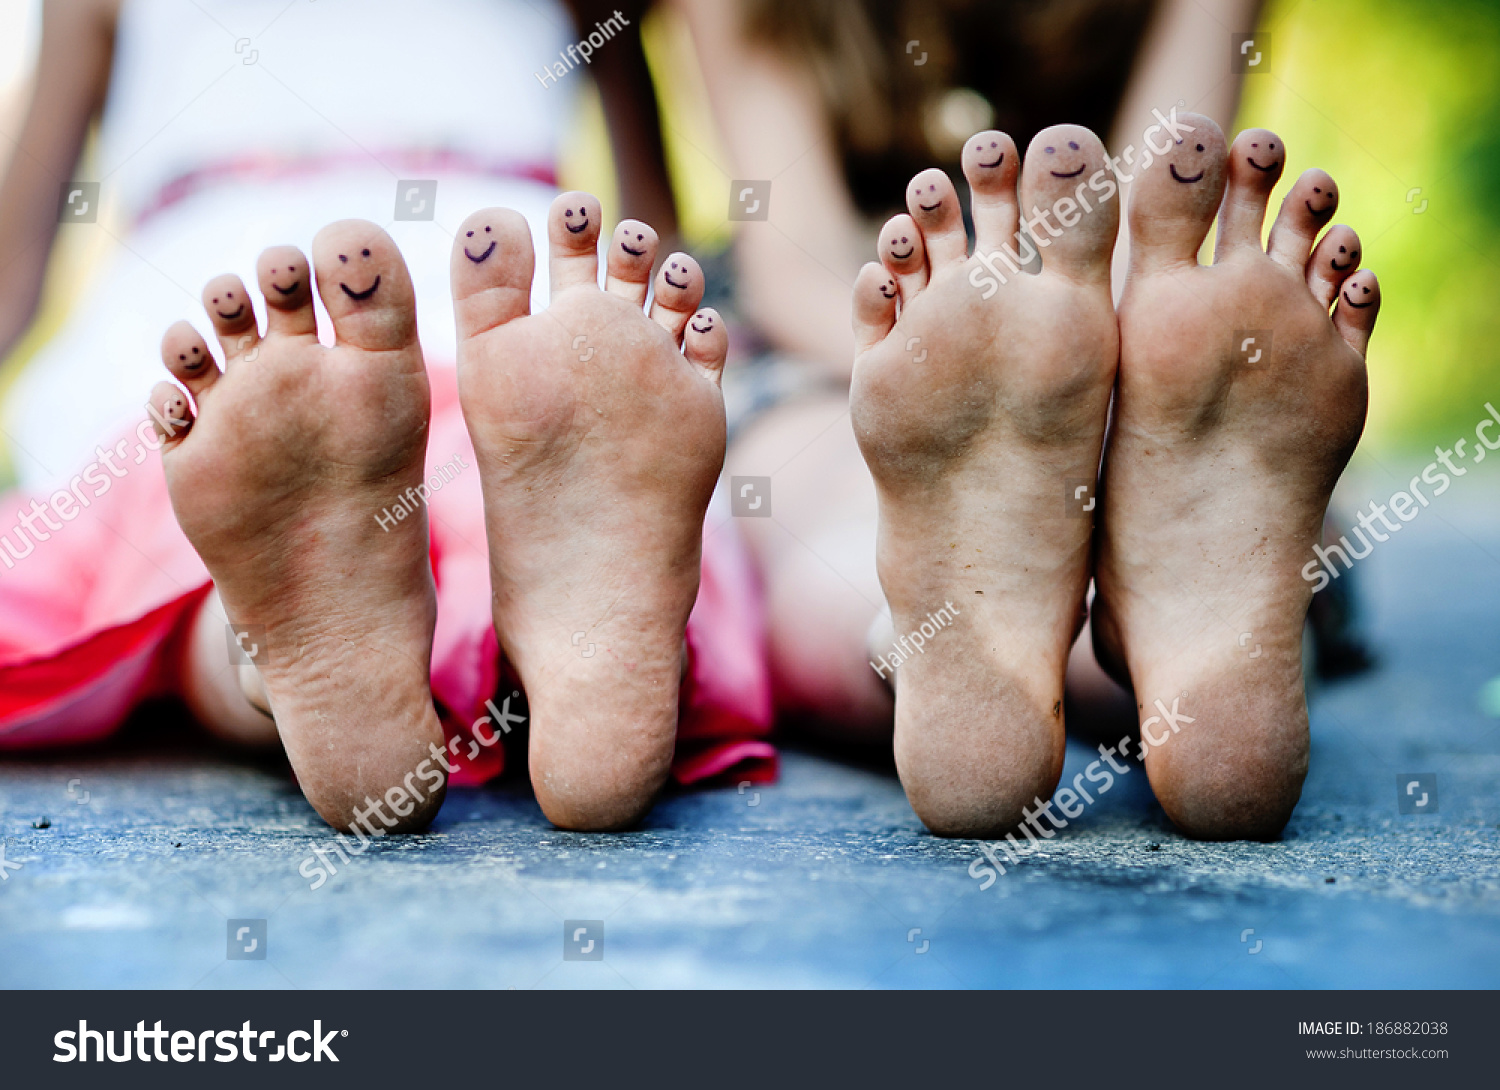 https://image.shutterstock.com/shutterstock/photos/186882038/display_1500/stock-photo-funny-feet-of-two-girls-sitting-on-a-pavement-in-green-park-186882038.jpg